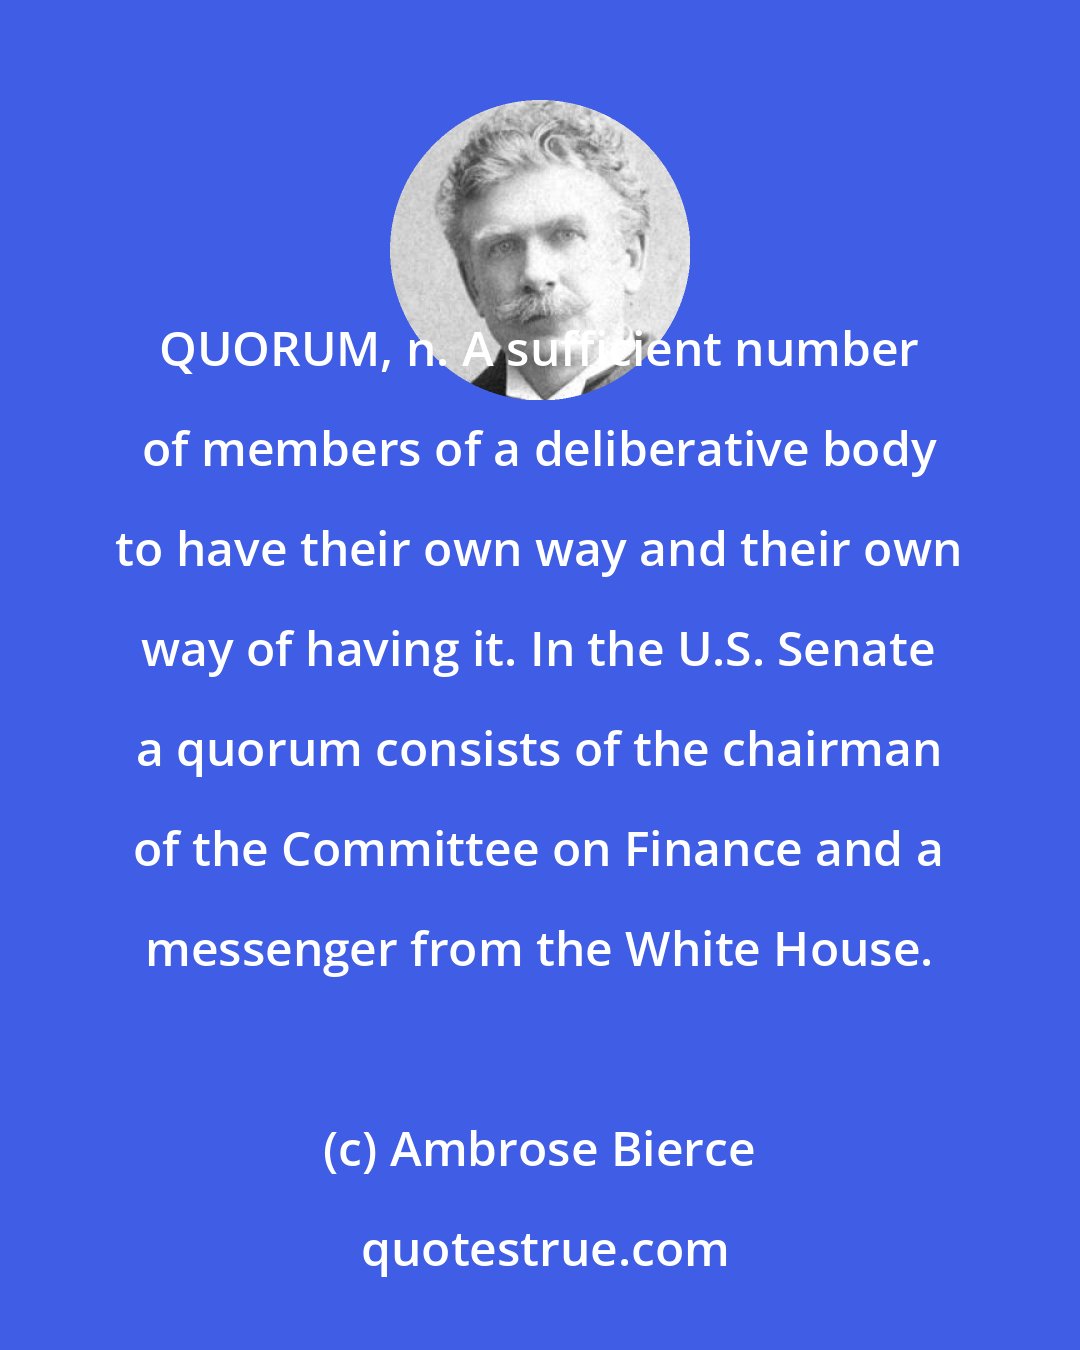 Ambrose Bierce: QUORUM, n. A sufficient number of members of a deliberative body to have their own way and their own way of having it. In the U.S. Senate a quorum consists of the chairman of the Committee on Finance and a messenger from the White House.